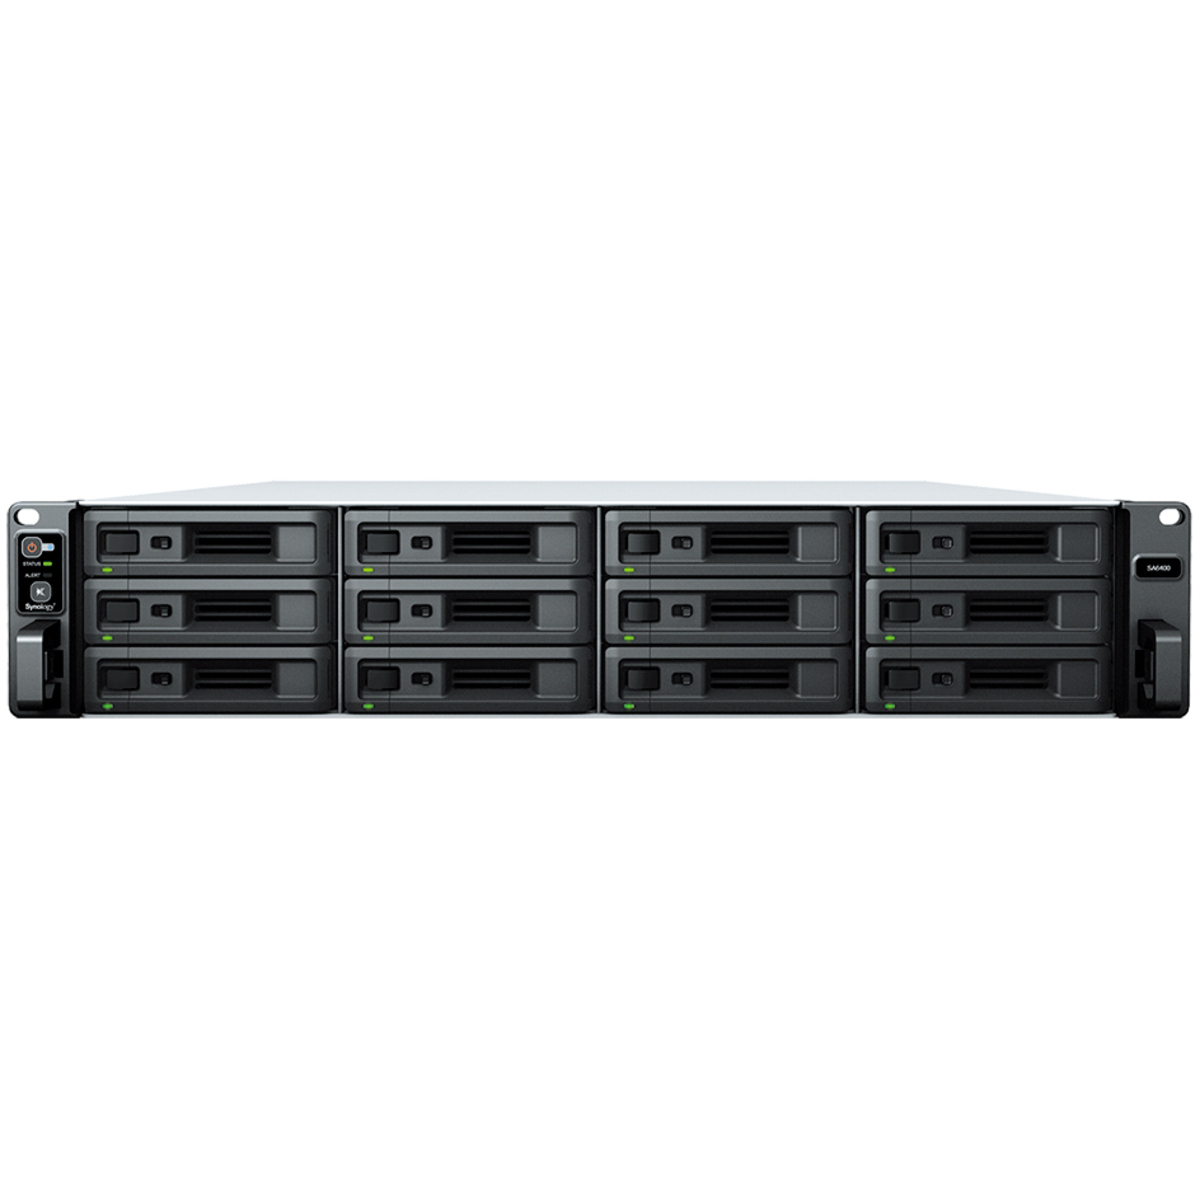 Synology RackStation SA6400 176tb 12-Bay RackMount Large Business / Enterprise NAS - Network Attached Storage Device 8x22tb Western Digital Ultrastar HC580 SED WUH722422ALE6L1 3.5 7200rpm SATA 6Gb/s HDD ENTERPRISE Class Drives Installed - Burn-In Tested RackStation SA6400